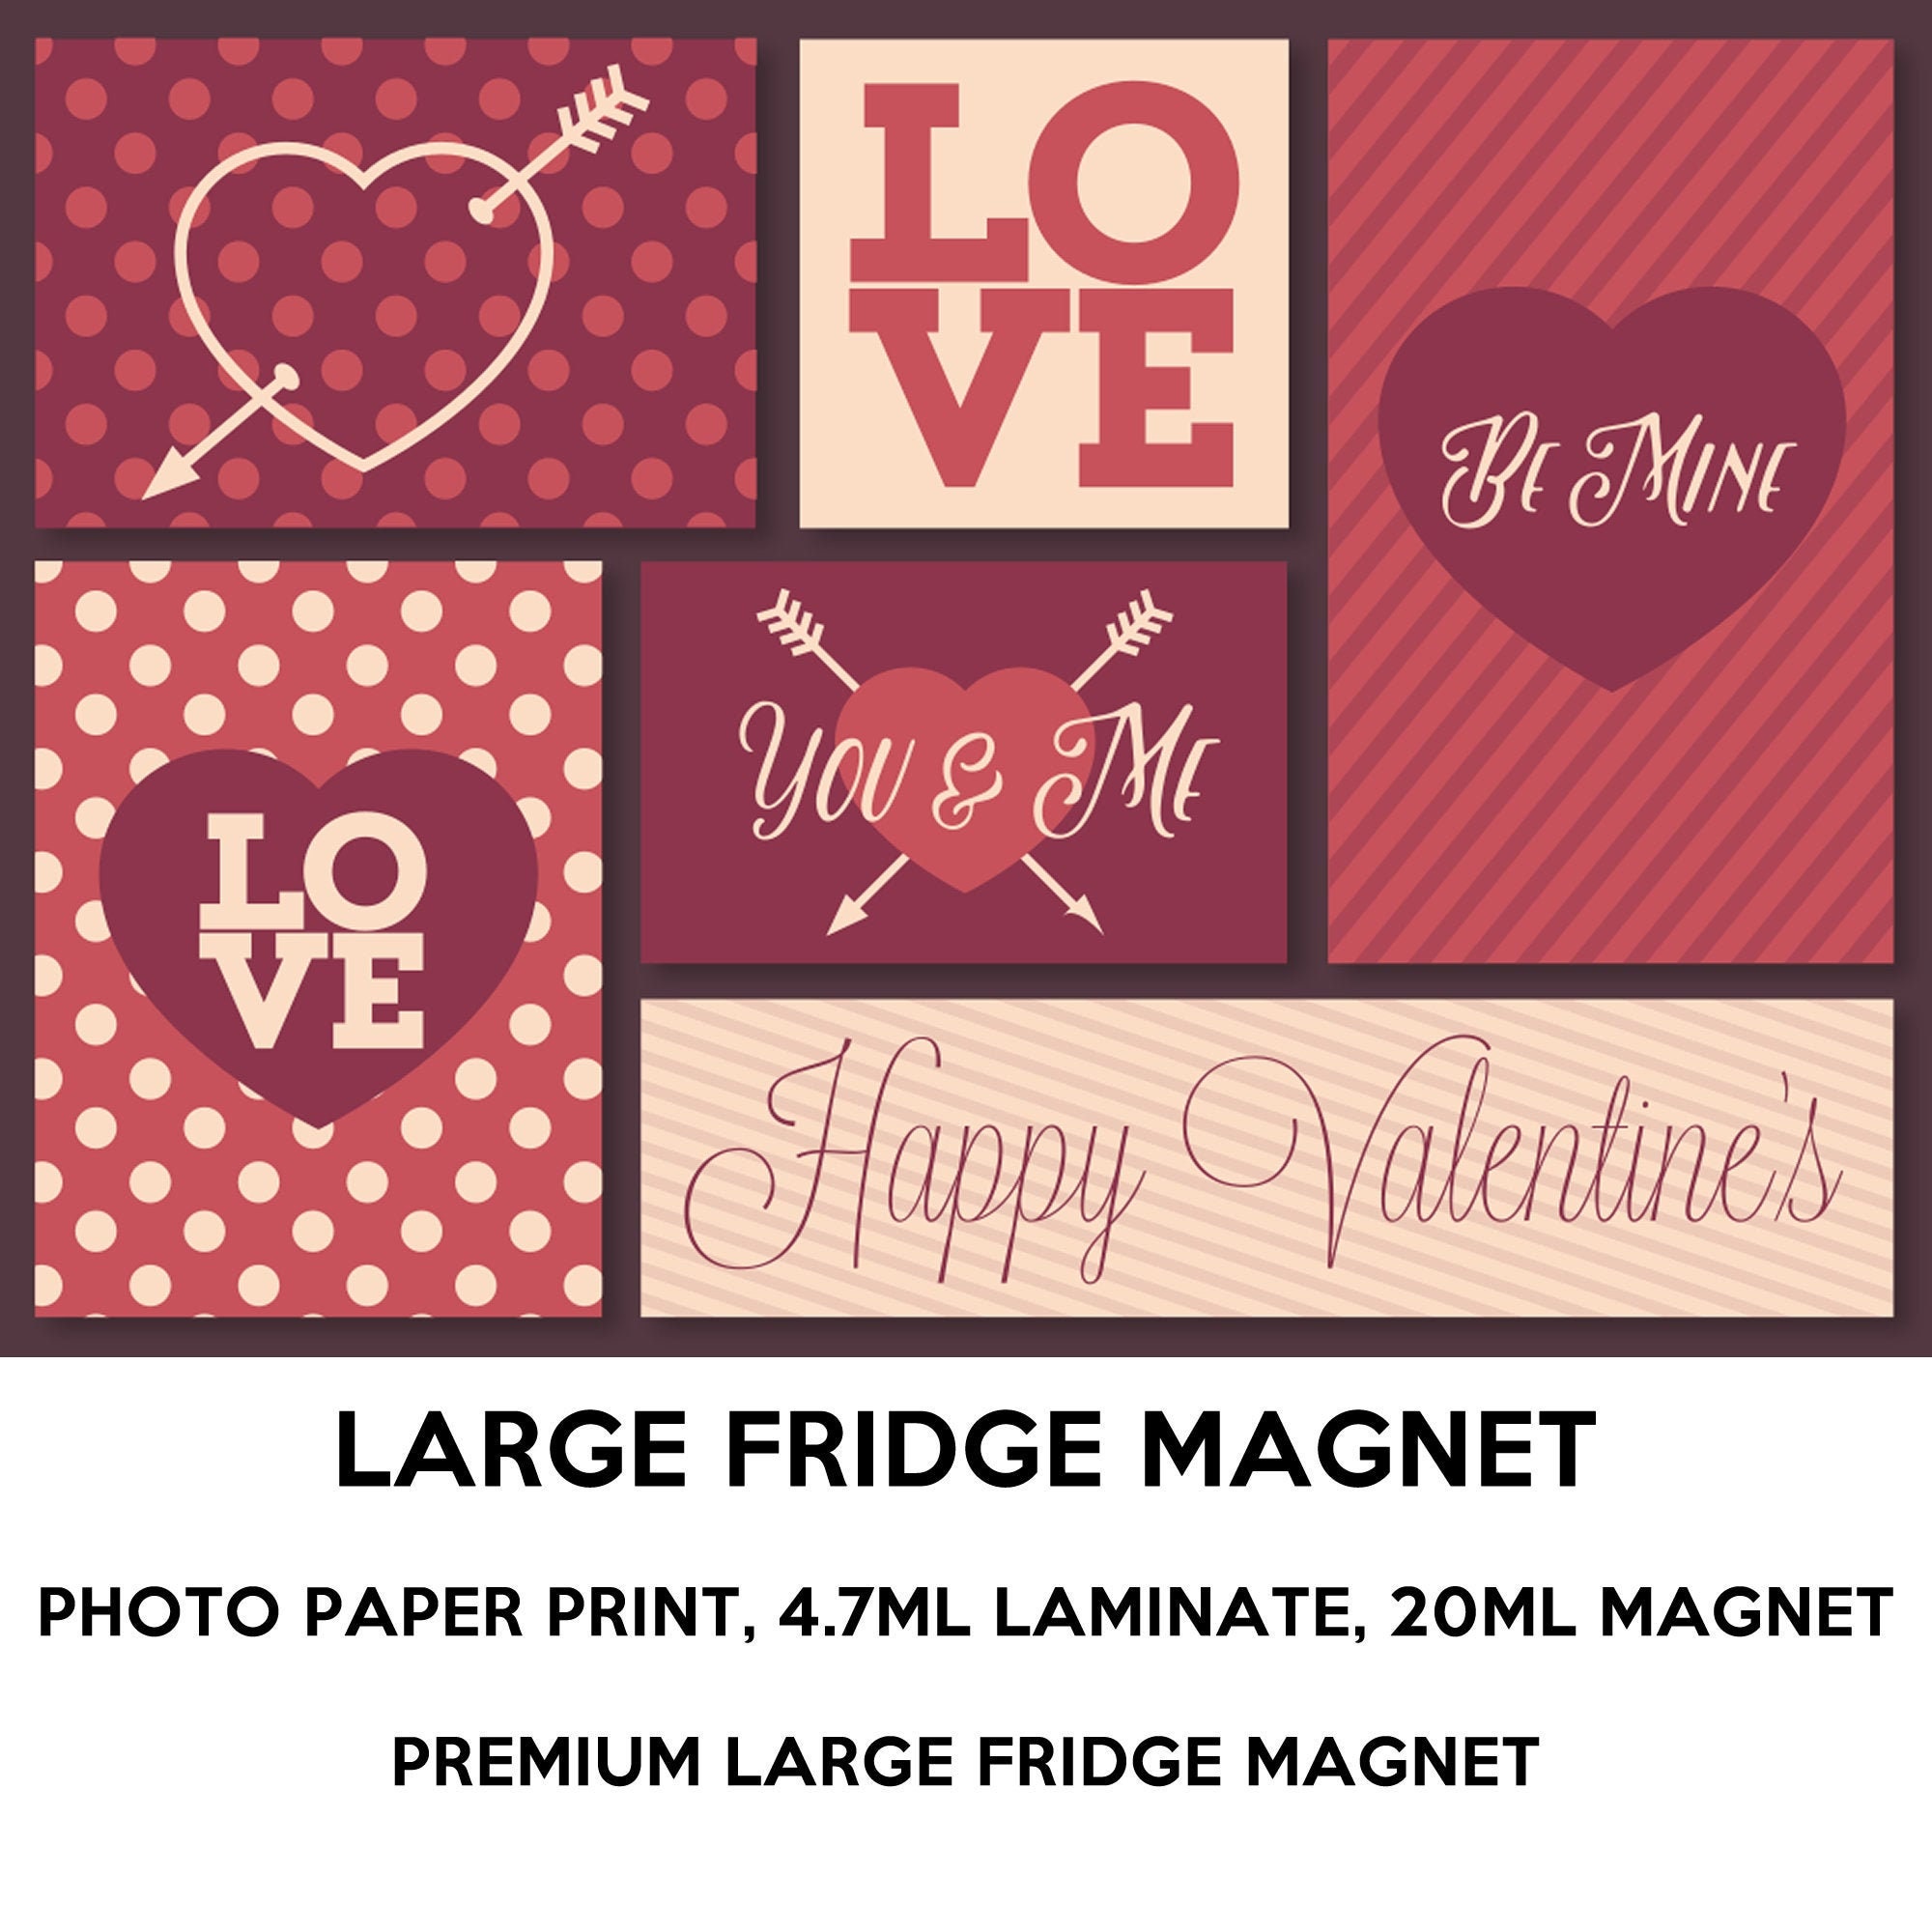 Happy Valentines Day 6.3 inch x 9 inch premium fridge magnet that stands out.